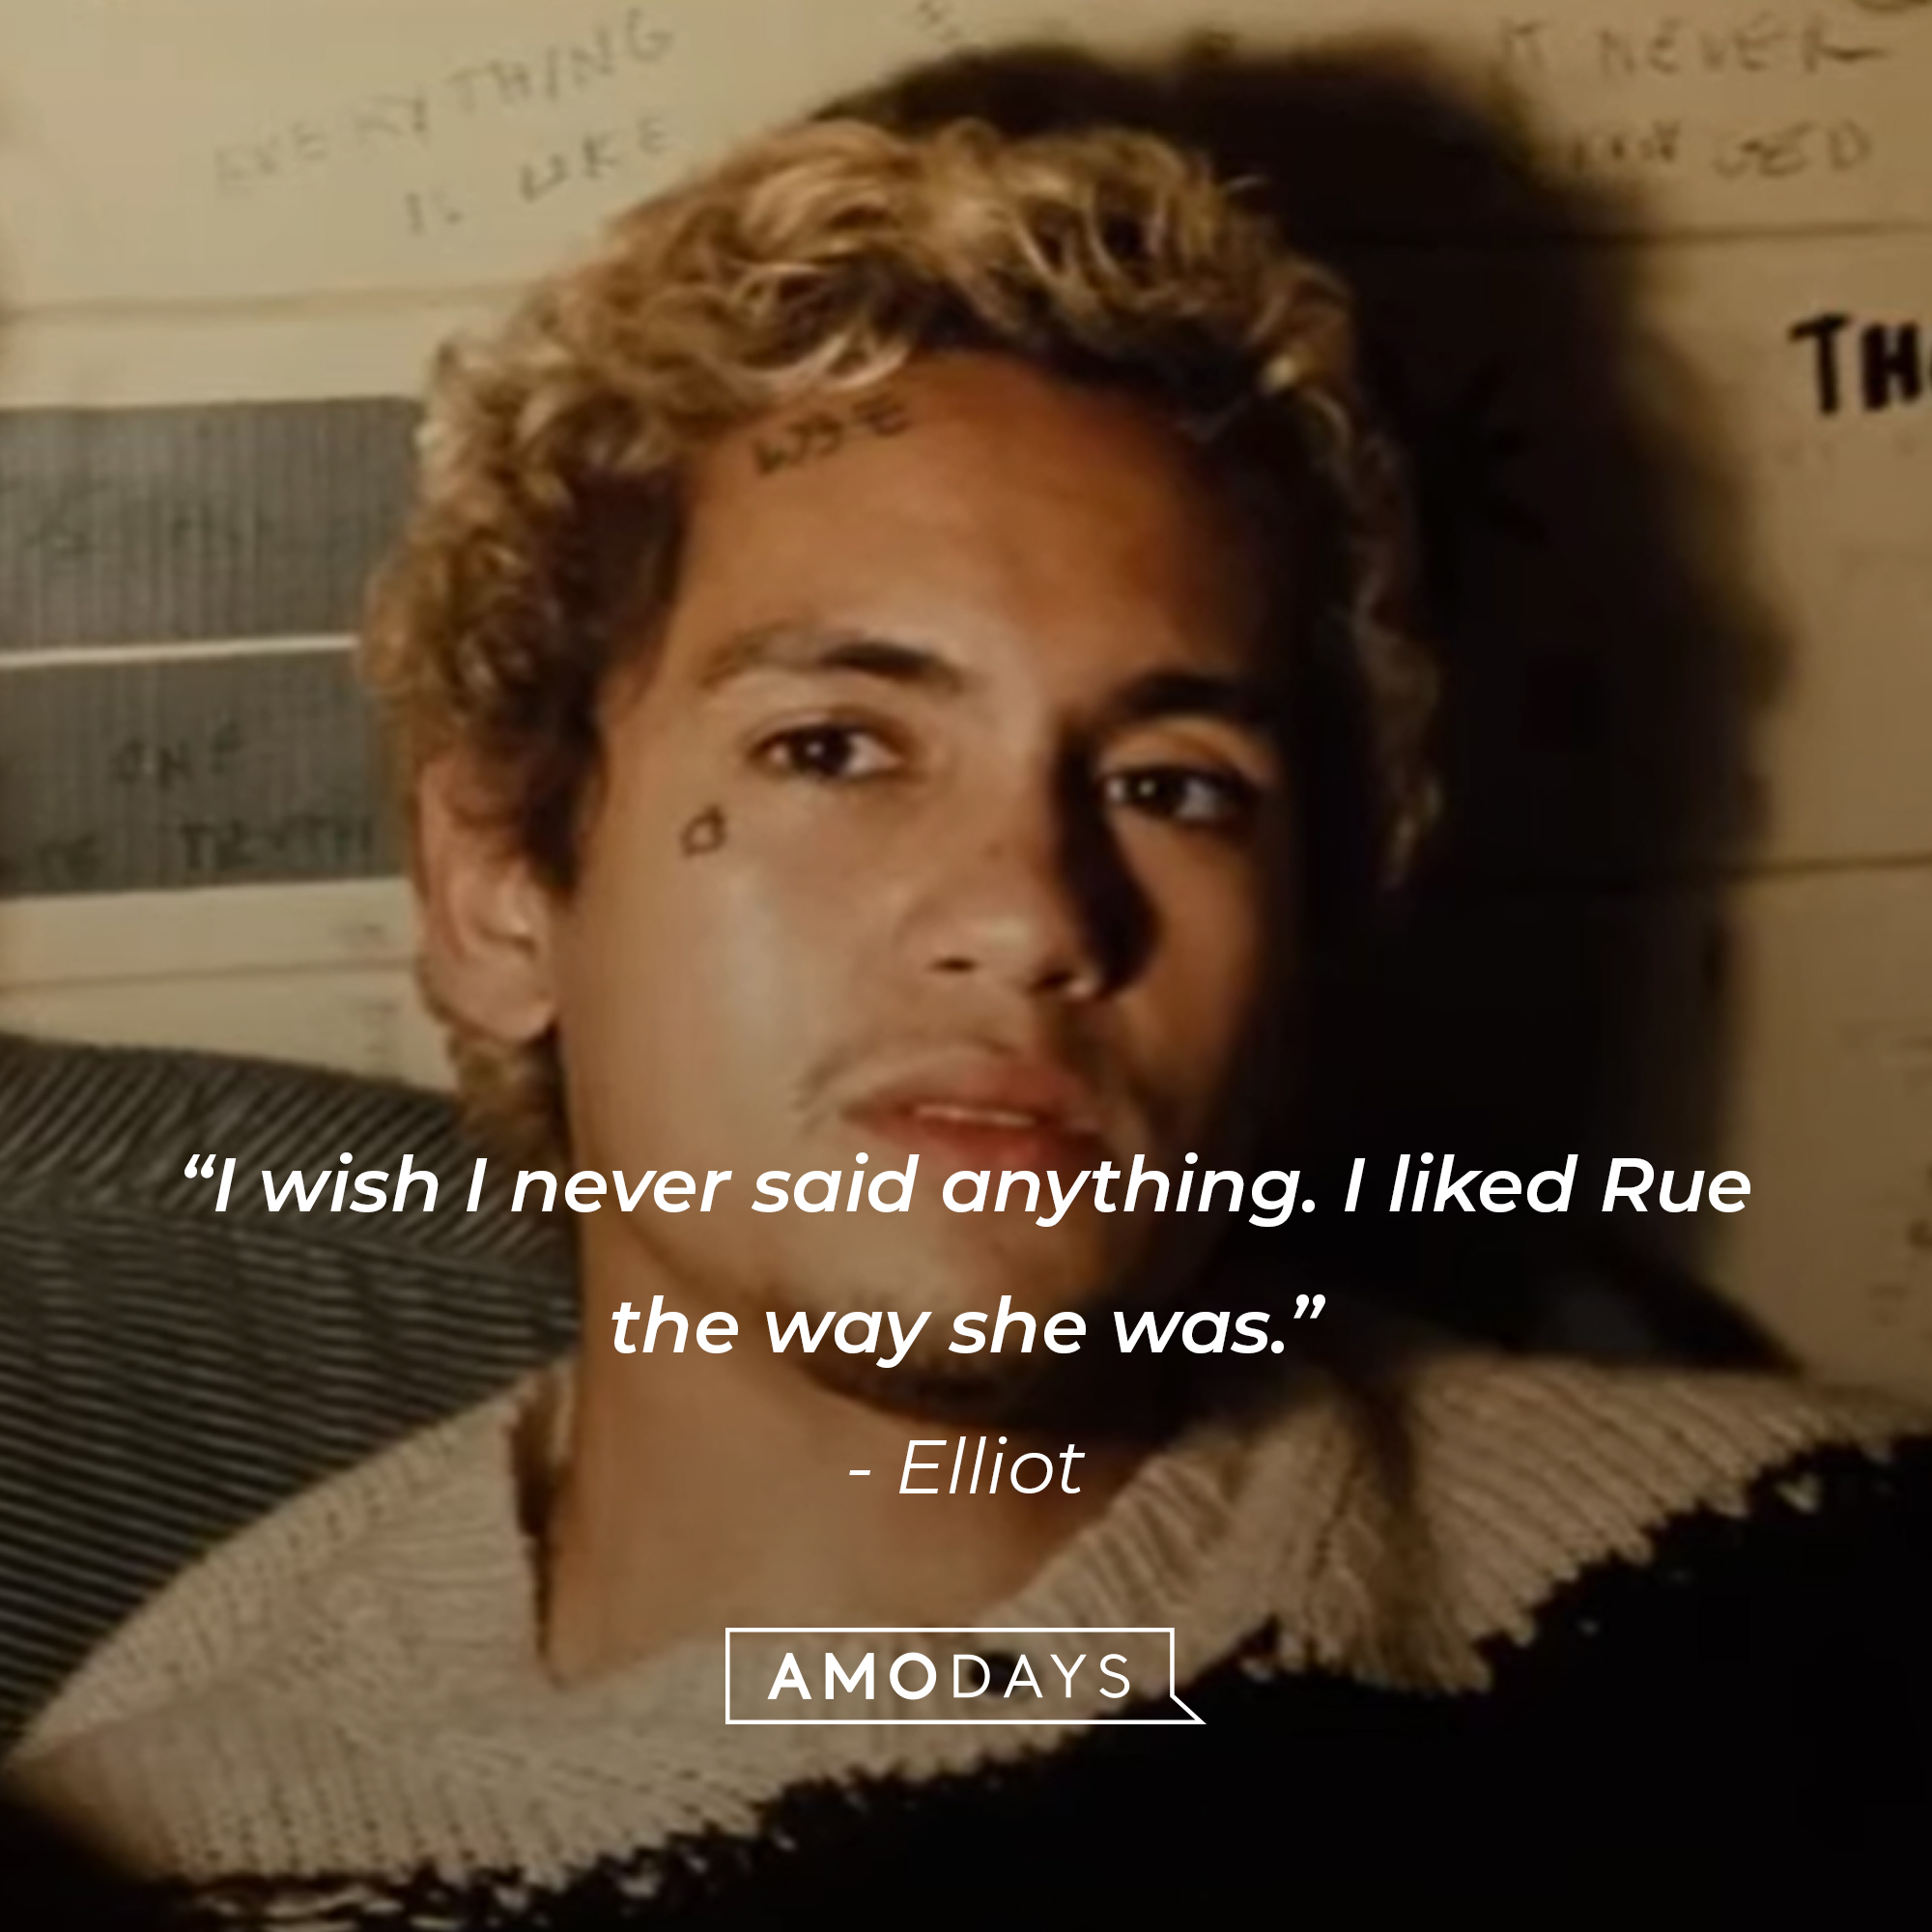 Elliot with his quote: “I wish I never said anything. I liked Rue the way she was.” | Source: HBO